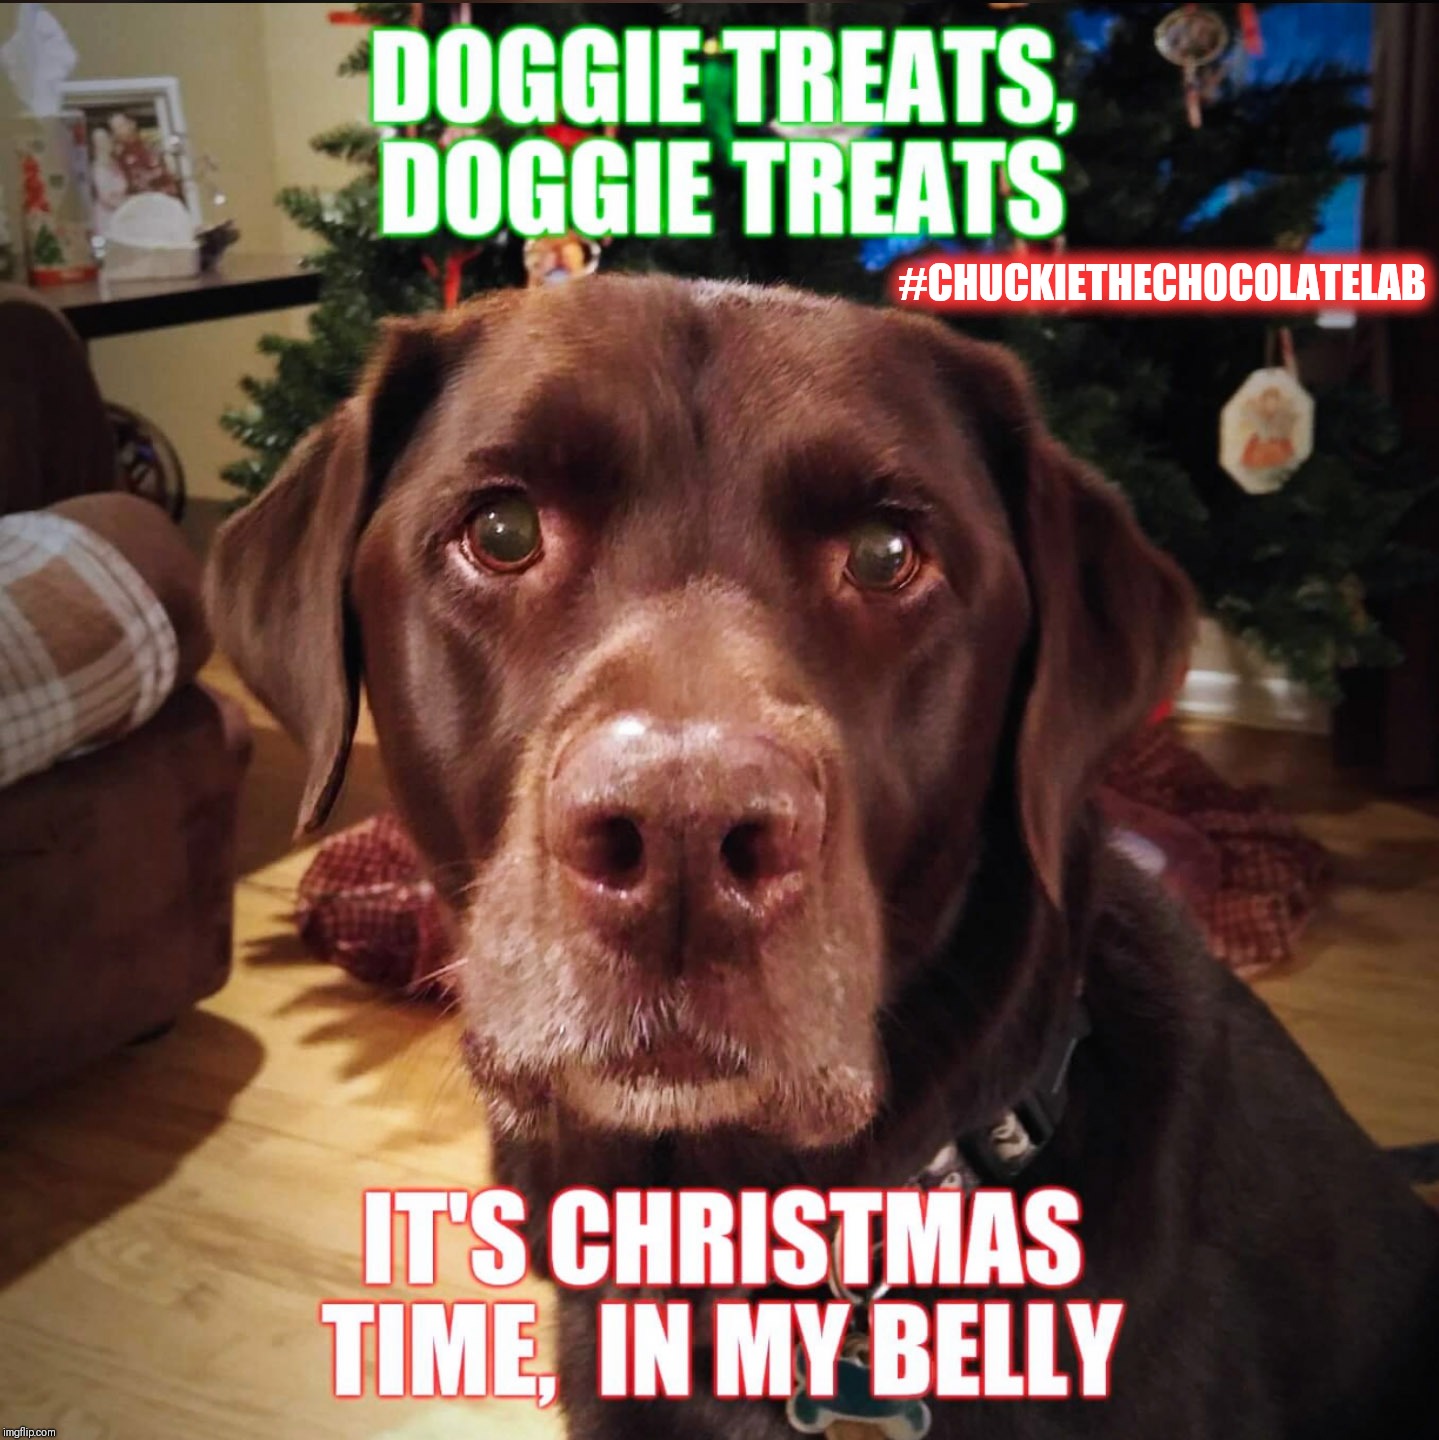 It's Christmas time in my belly | #CHUCKIETHECHOCOLATELAB | image tagged in chuckie the chocolate lab,christmas,dogs,funny,memes,holidays | made w/ Imgflip meme maker